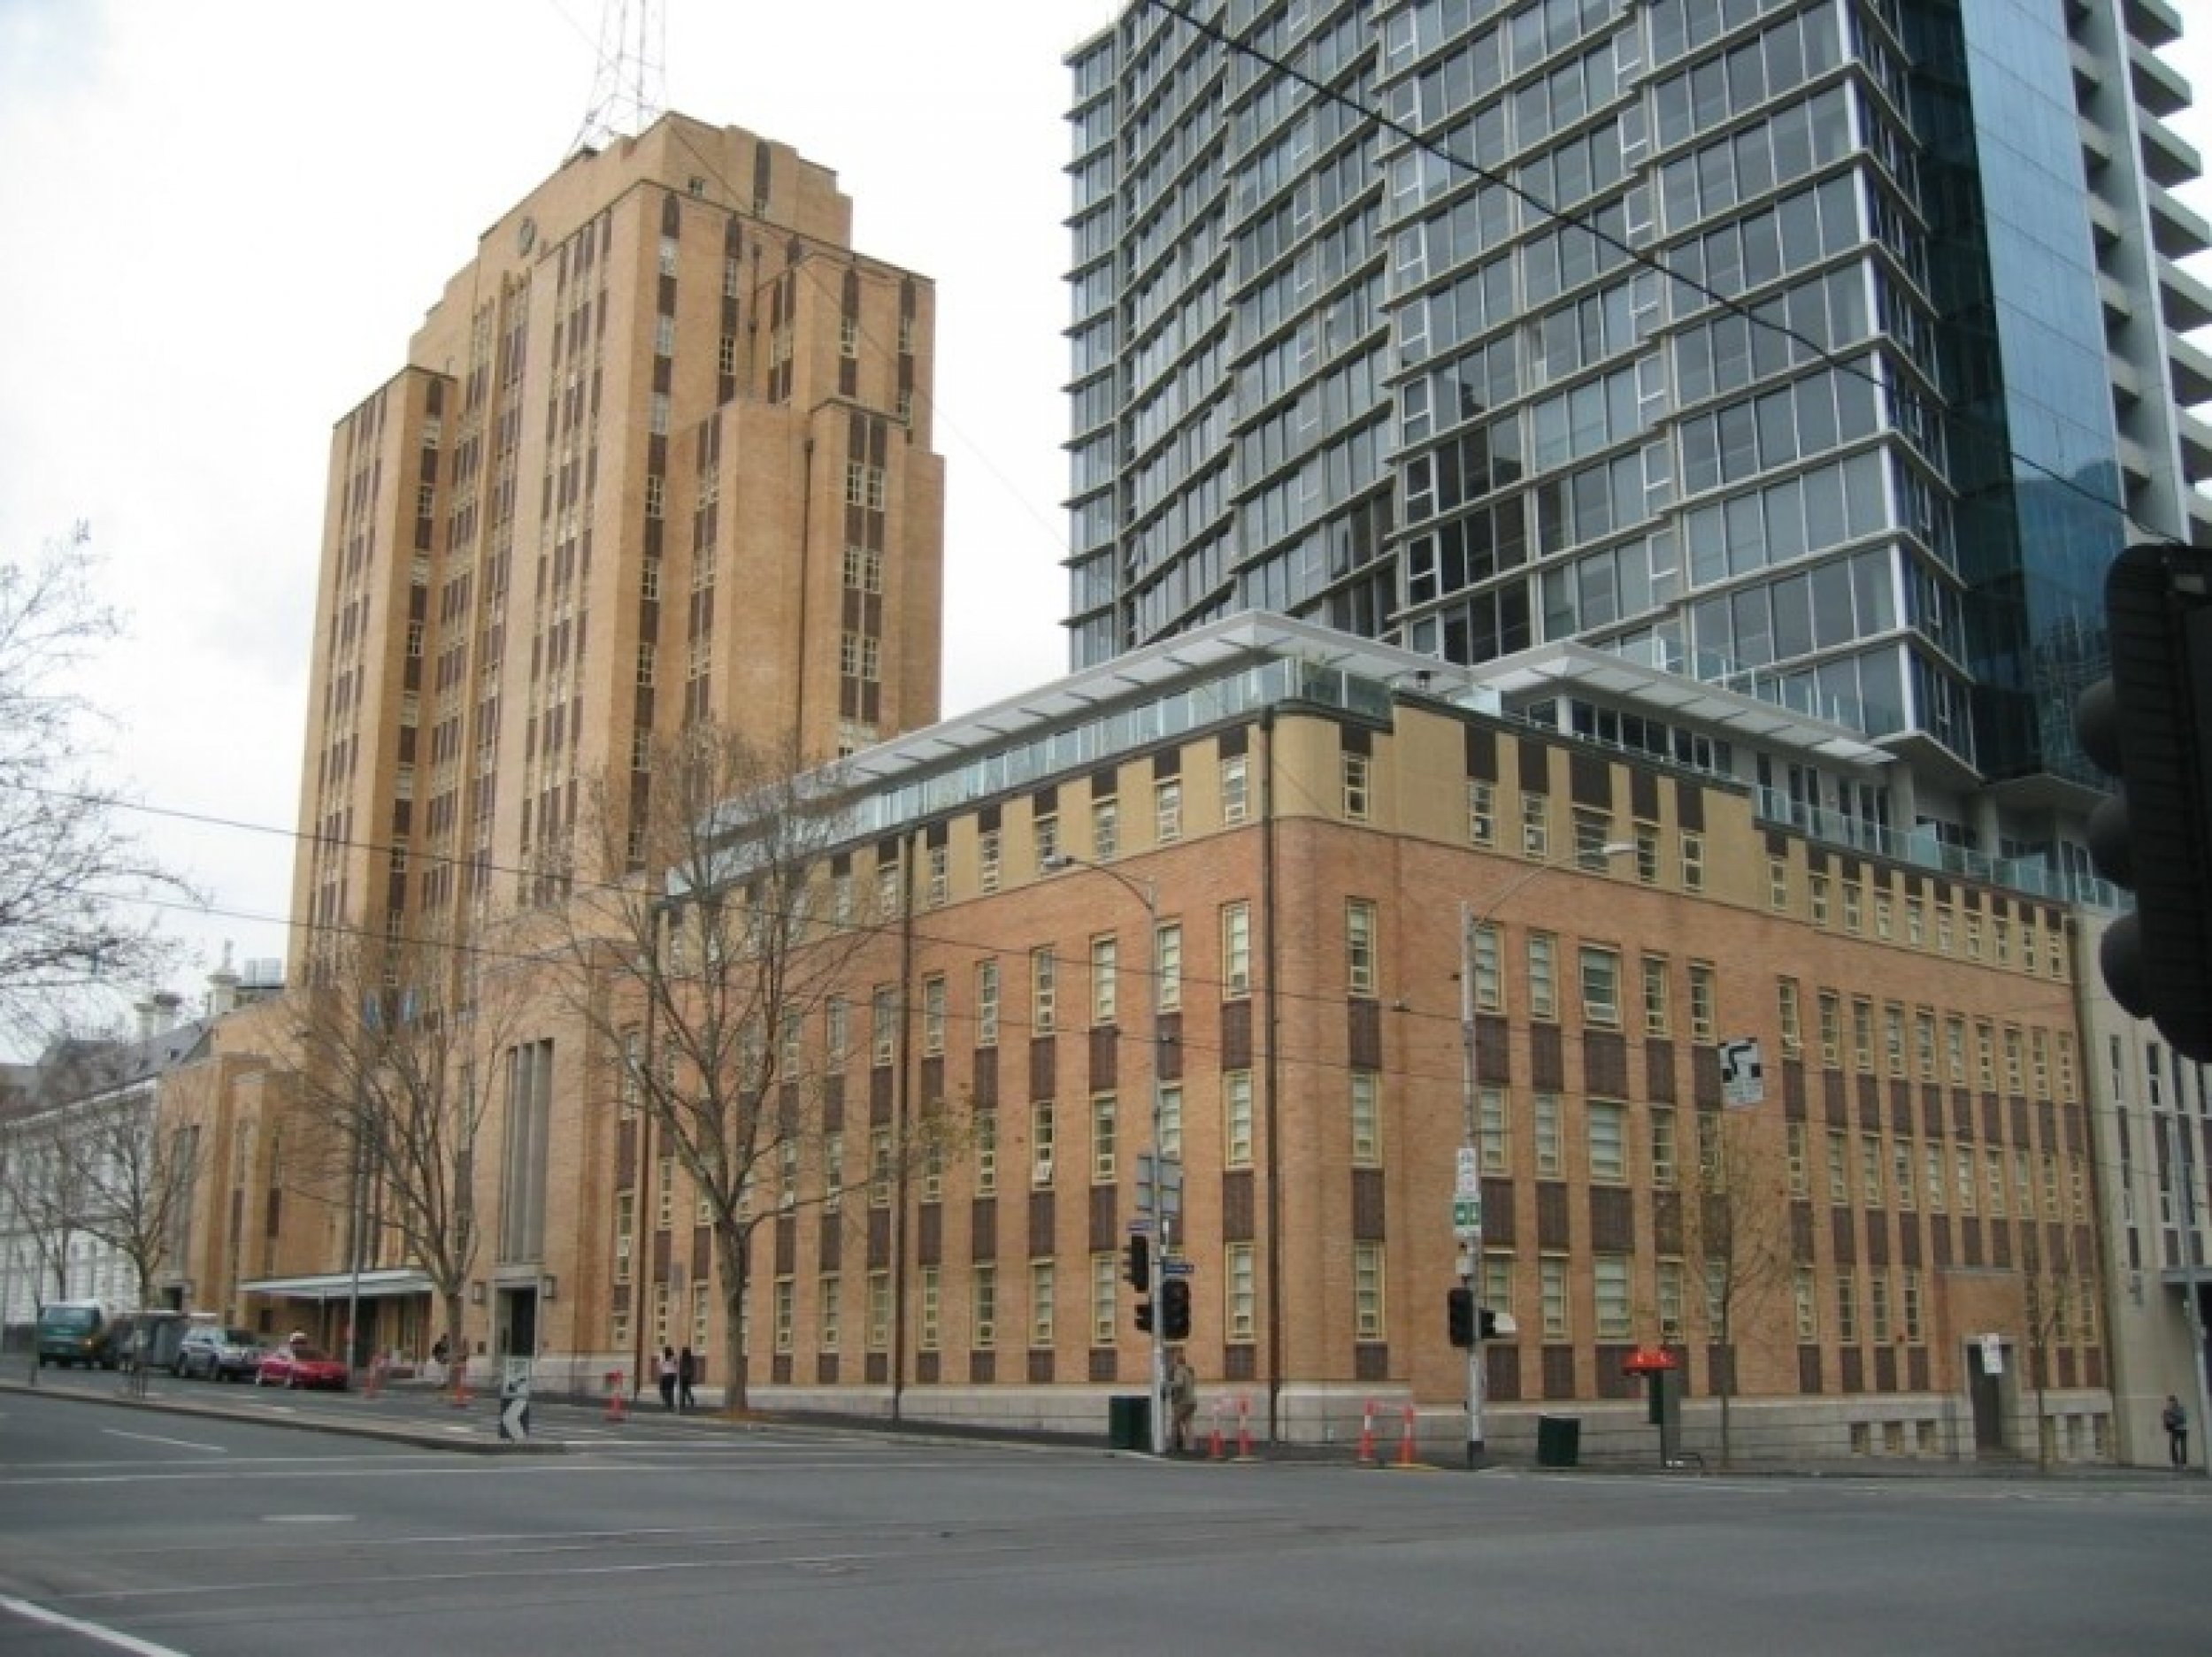 Russell Street Police Headquarters, Melbourne